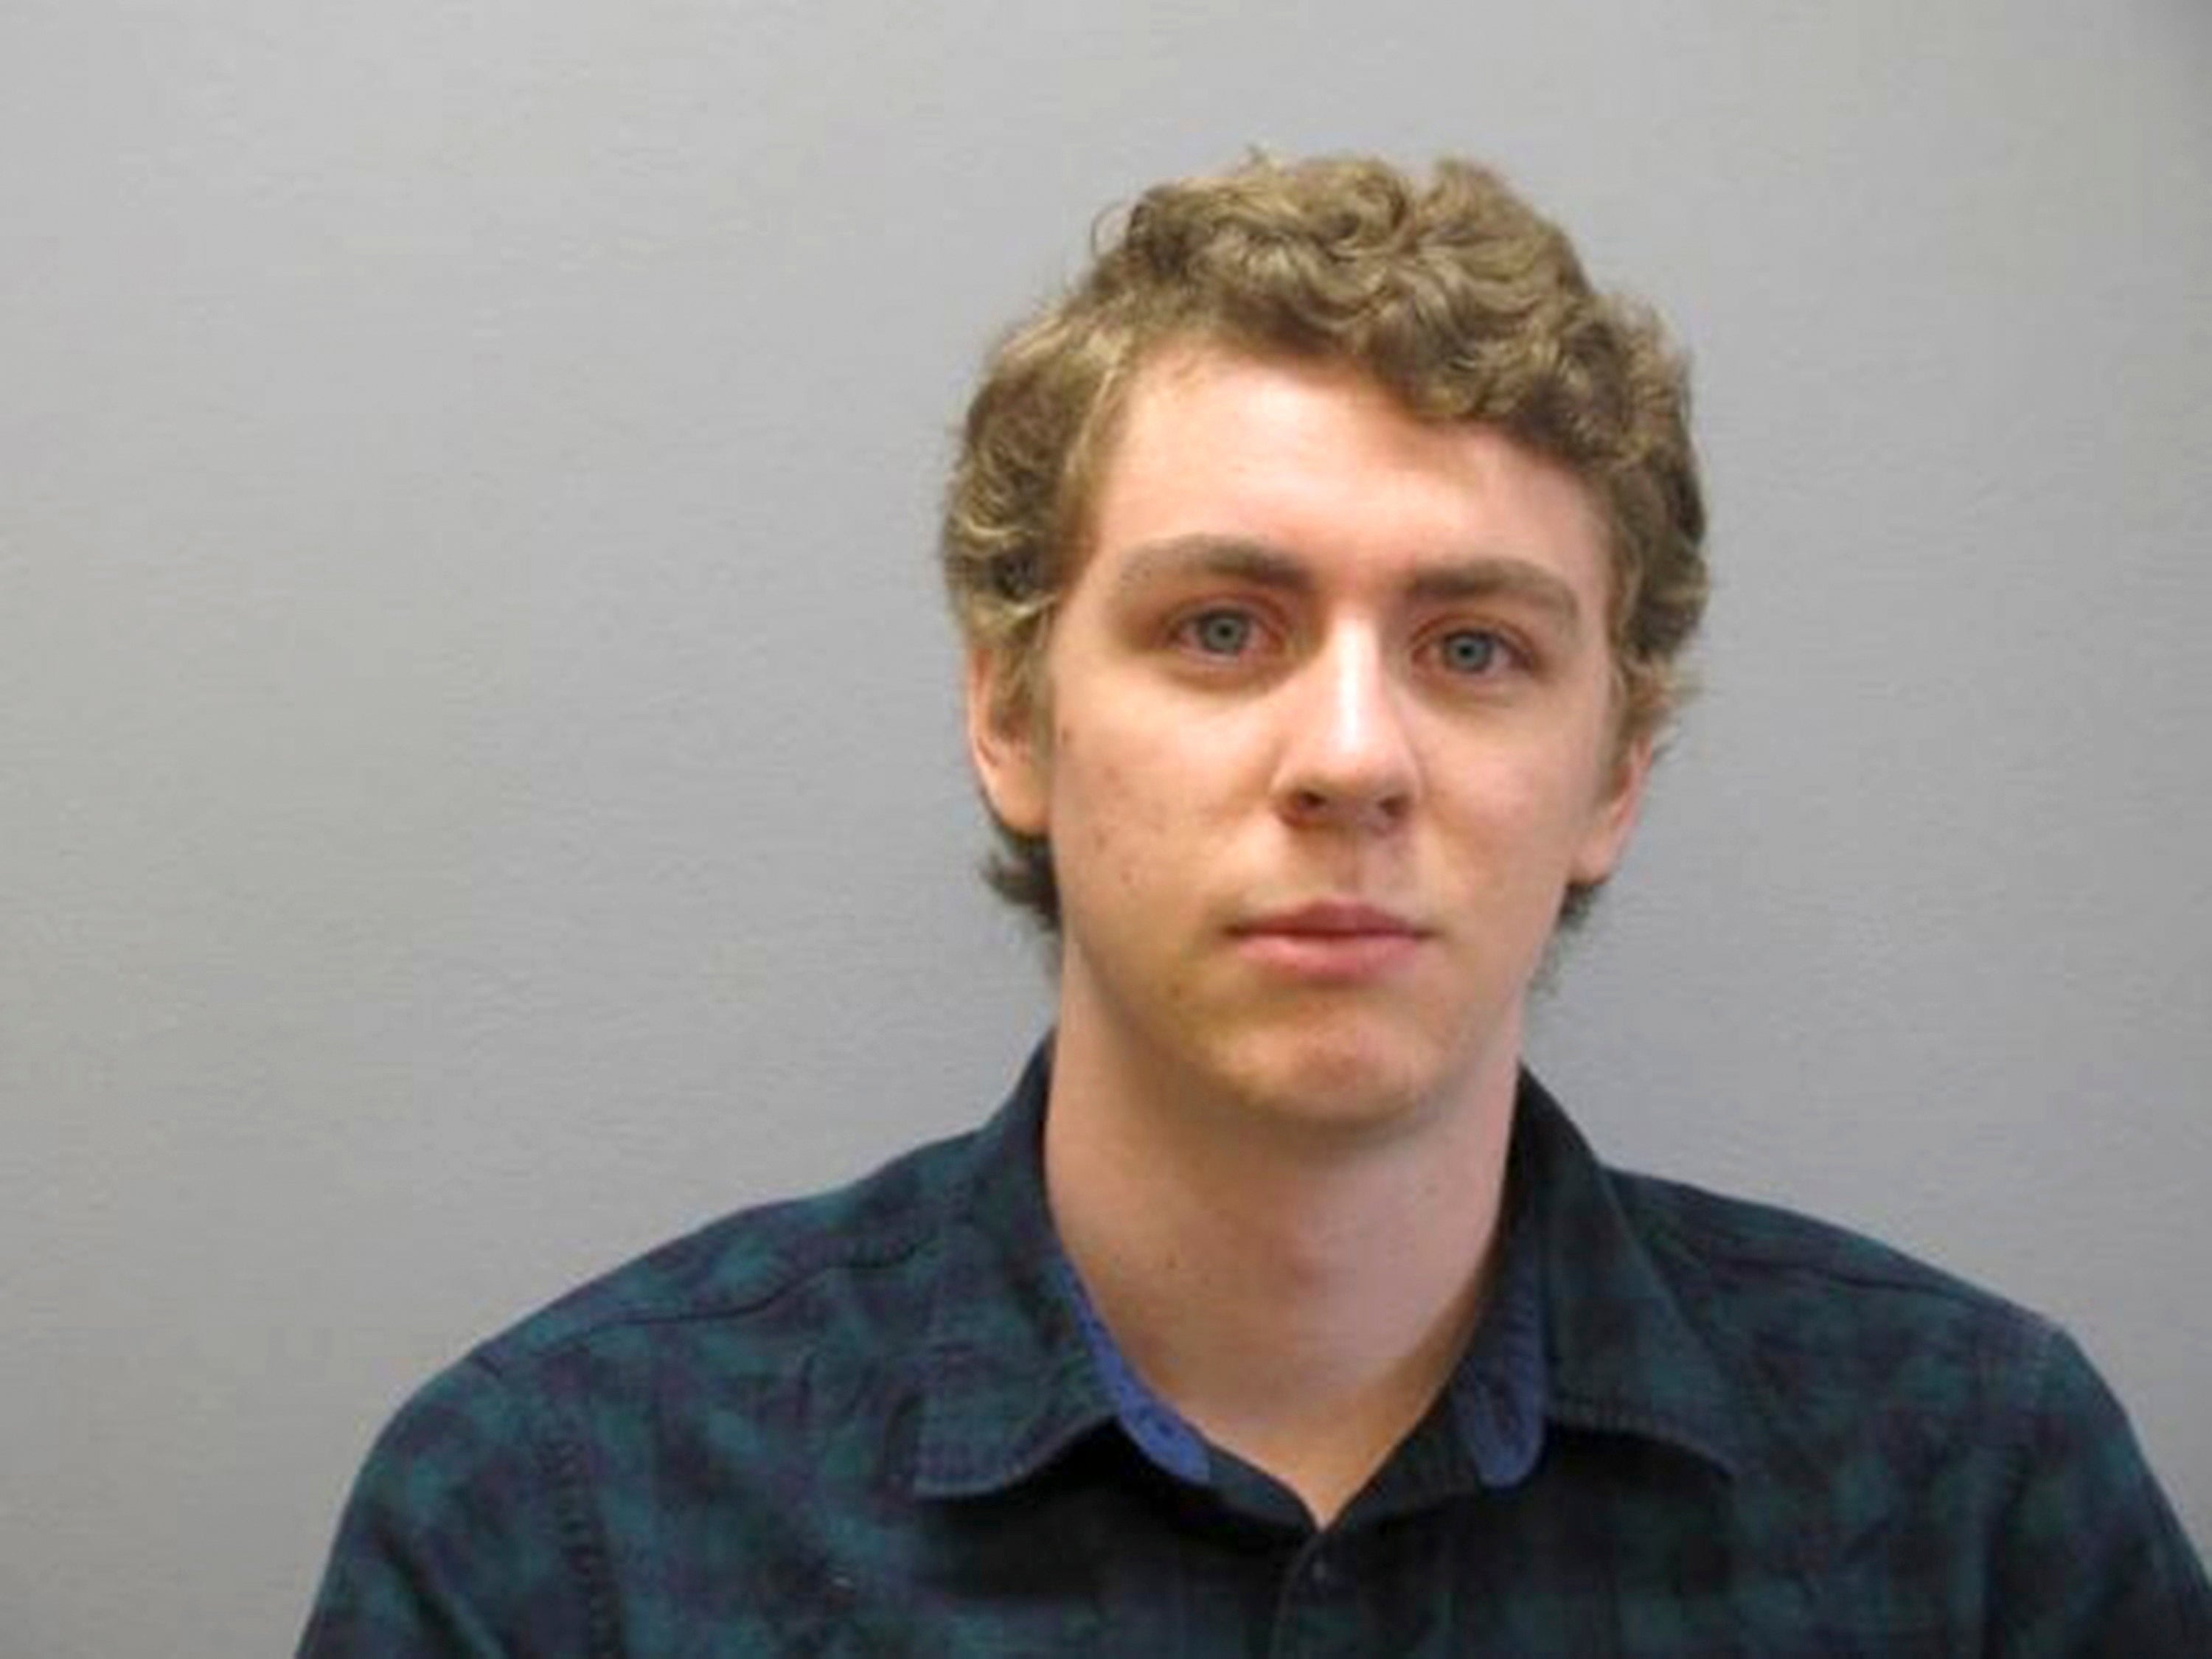 Brock Turner in a booking photo in September 2016 after he was released from prison and officially registered as a sex offender